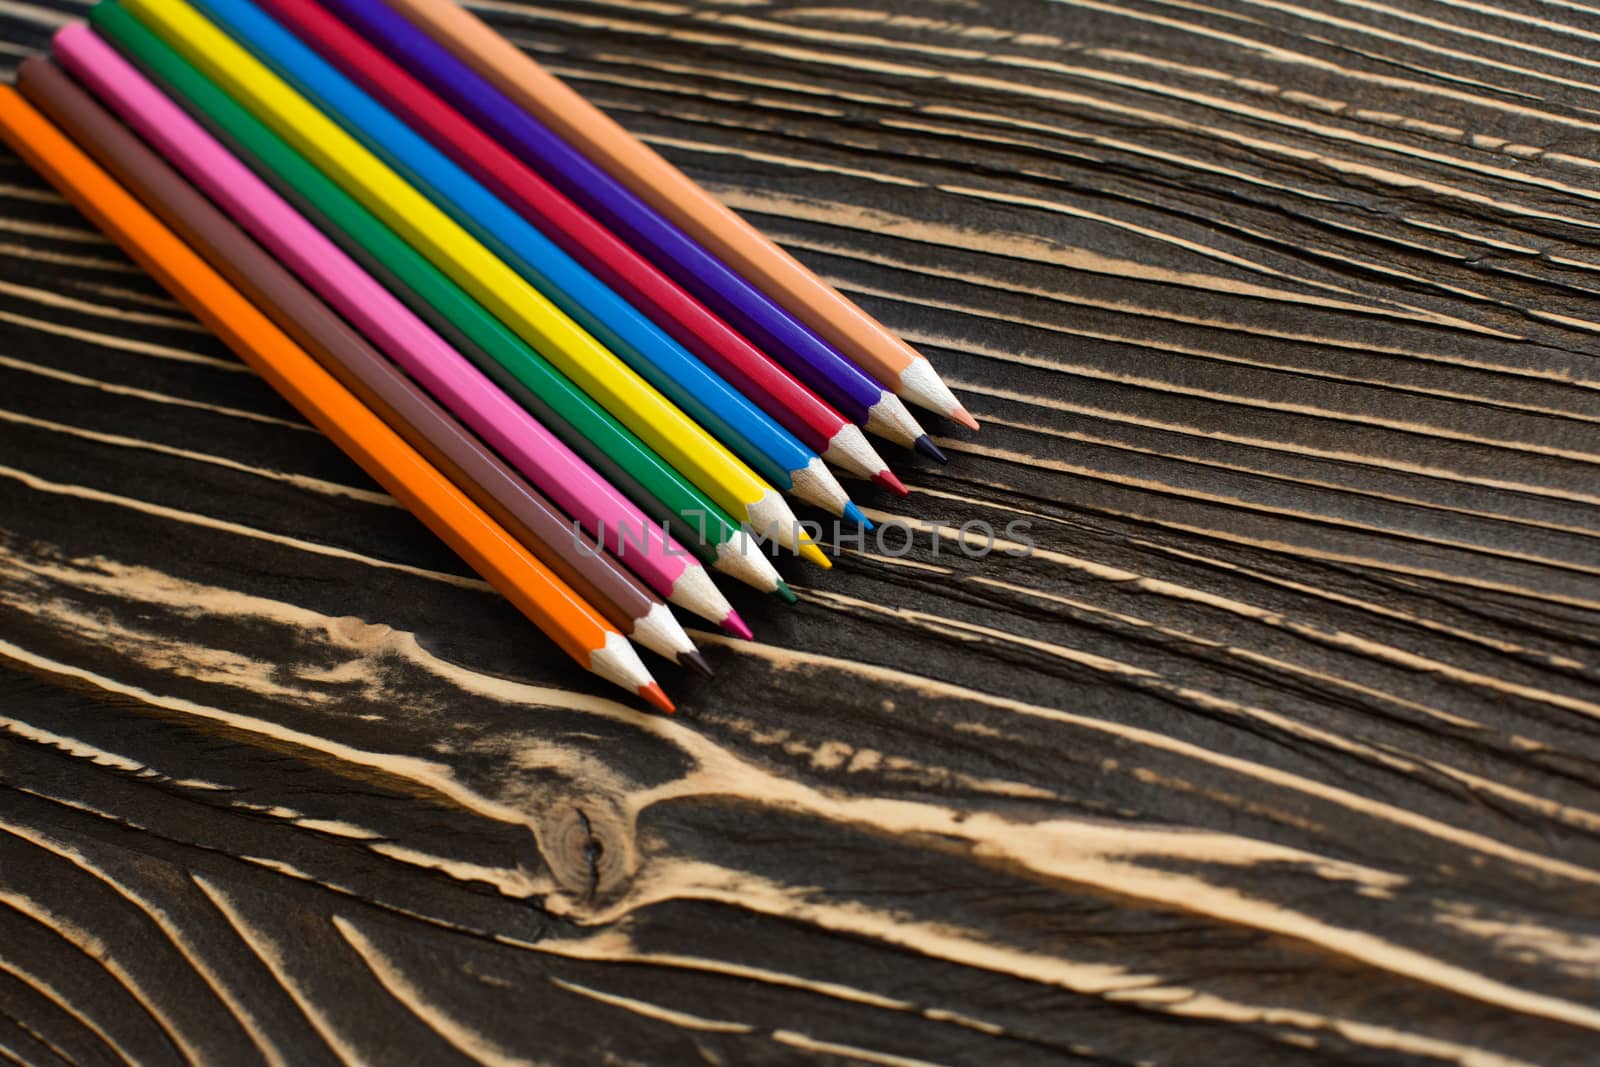 Colored pencils on the table by lanser314